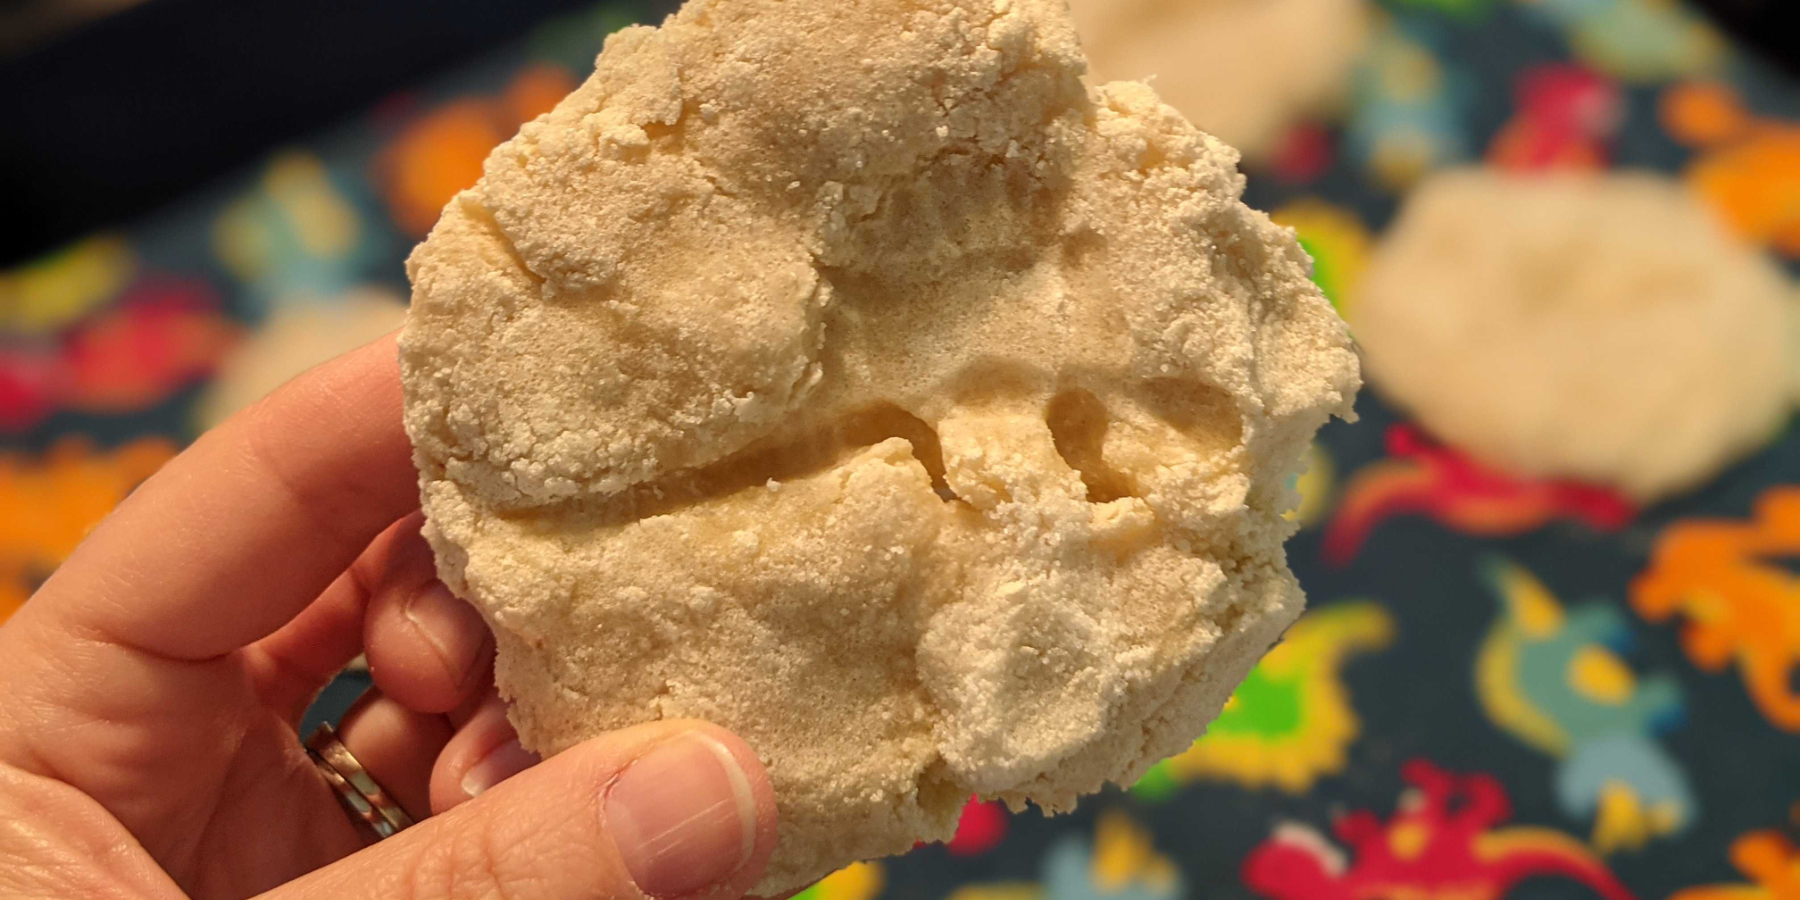 Make Your Own Fossils | Atlanta Science Festival - The Den